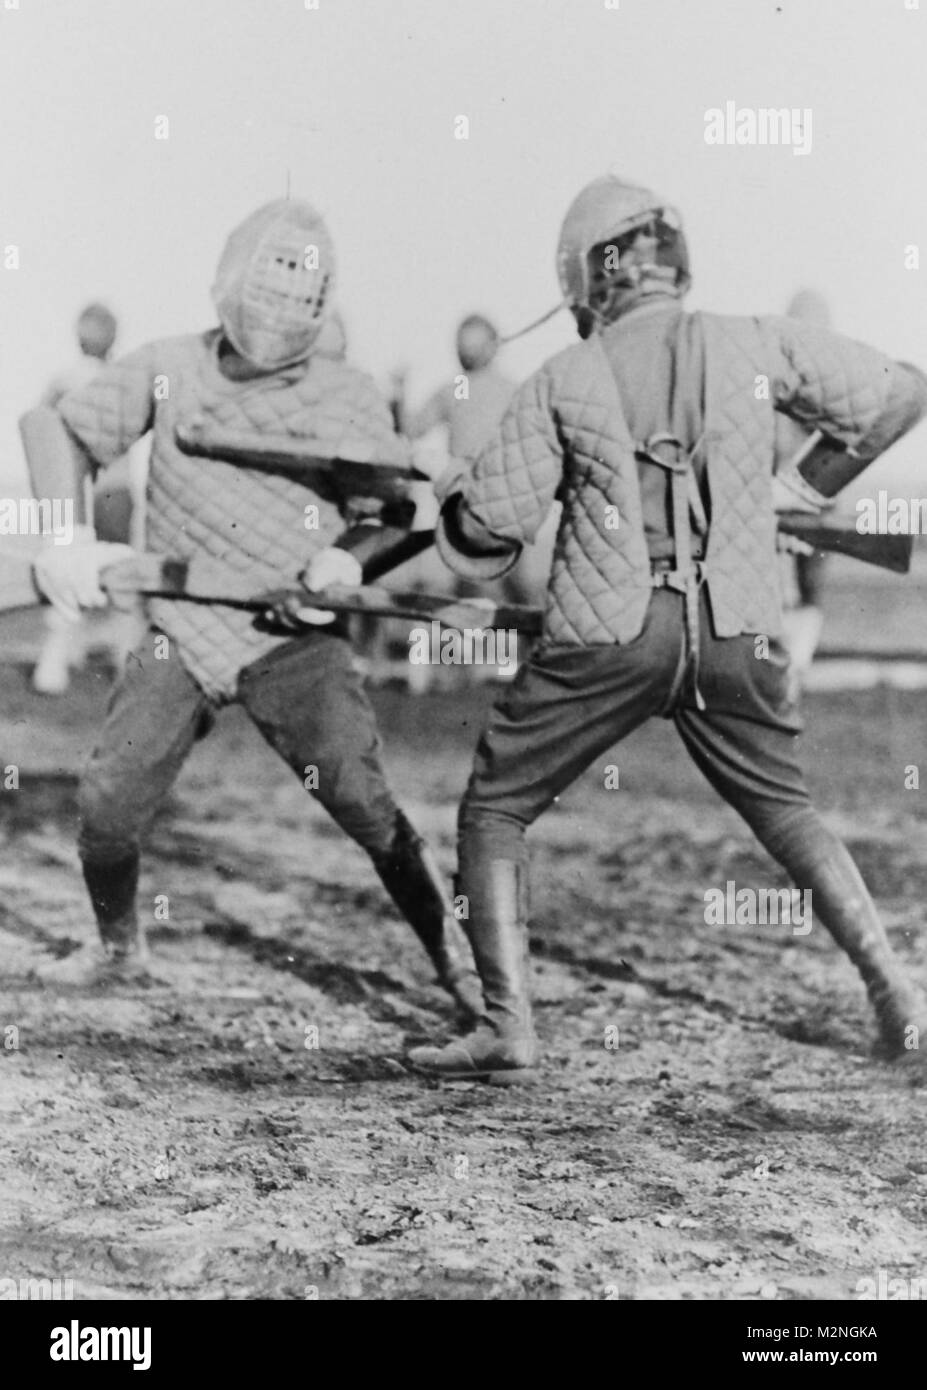 CAMP WHEELER, Macon, Ga., February 5, 1918 – Two men of the 31st Division fight with dummy rifles on the bayonet defense course, Camp Wheeler, Ga. Photo 4754, National Archives Records Administration (NARA), College Park, Md. Bayonette Fighting by Georgia National Guard Stock Photo